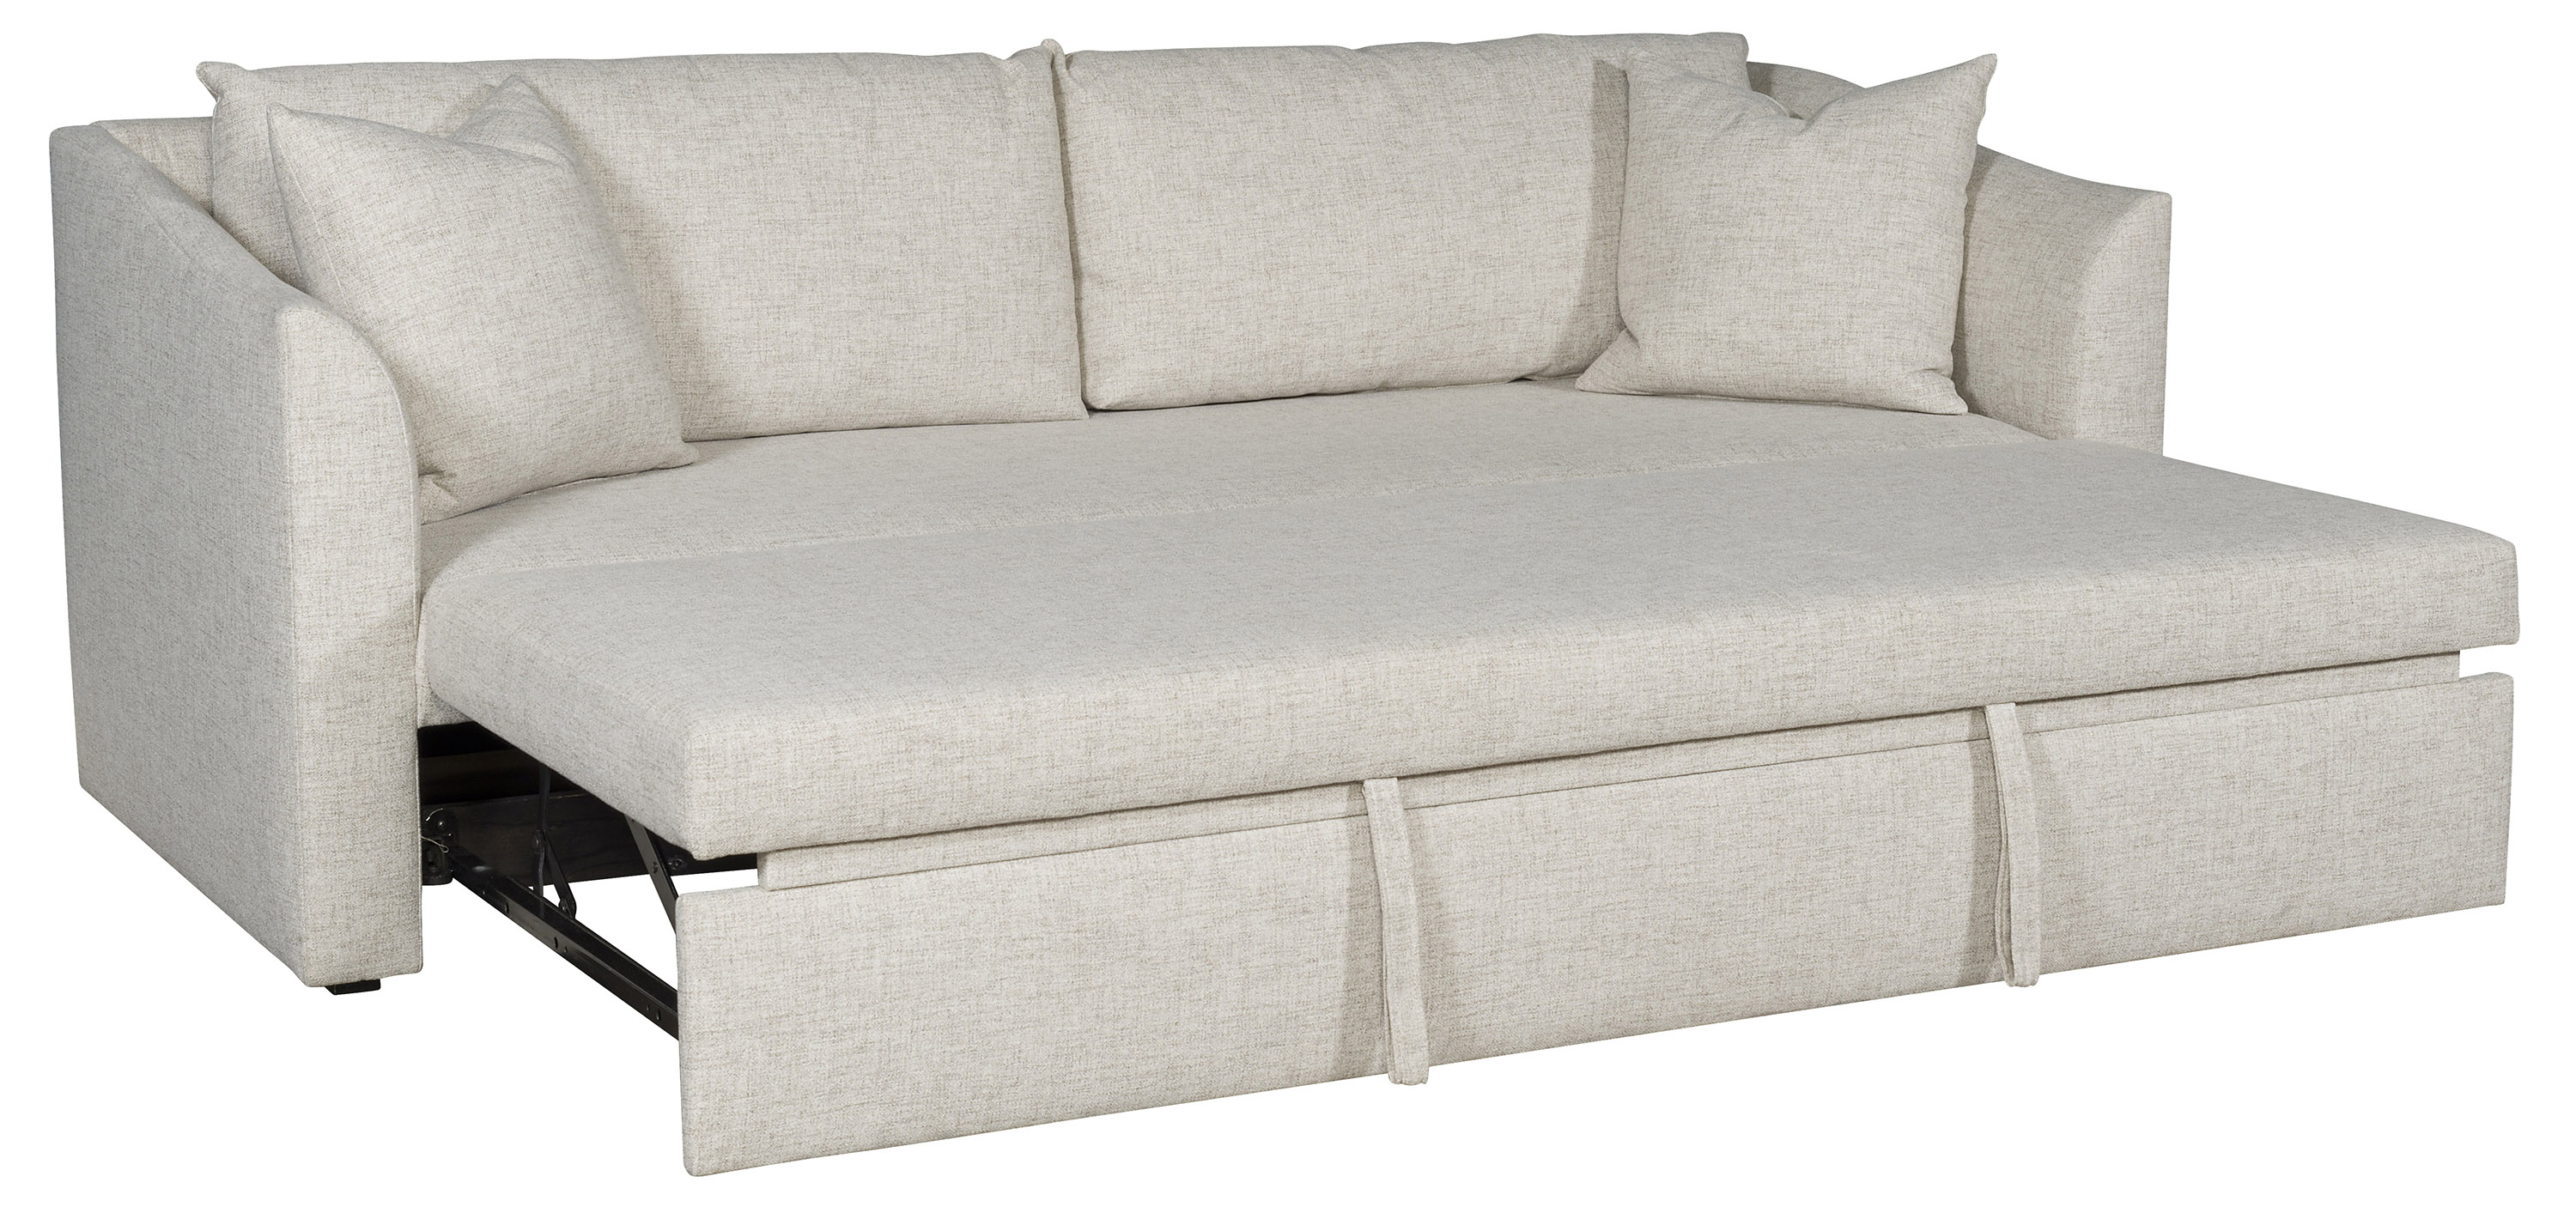 Ad Pull Out Sleeper Sofa V161 P, Pull Out Sleeper Sofa Bed